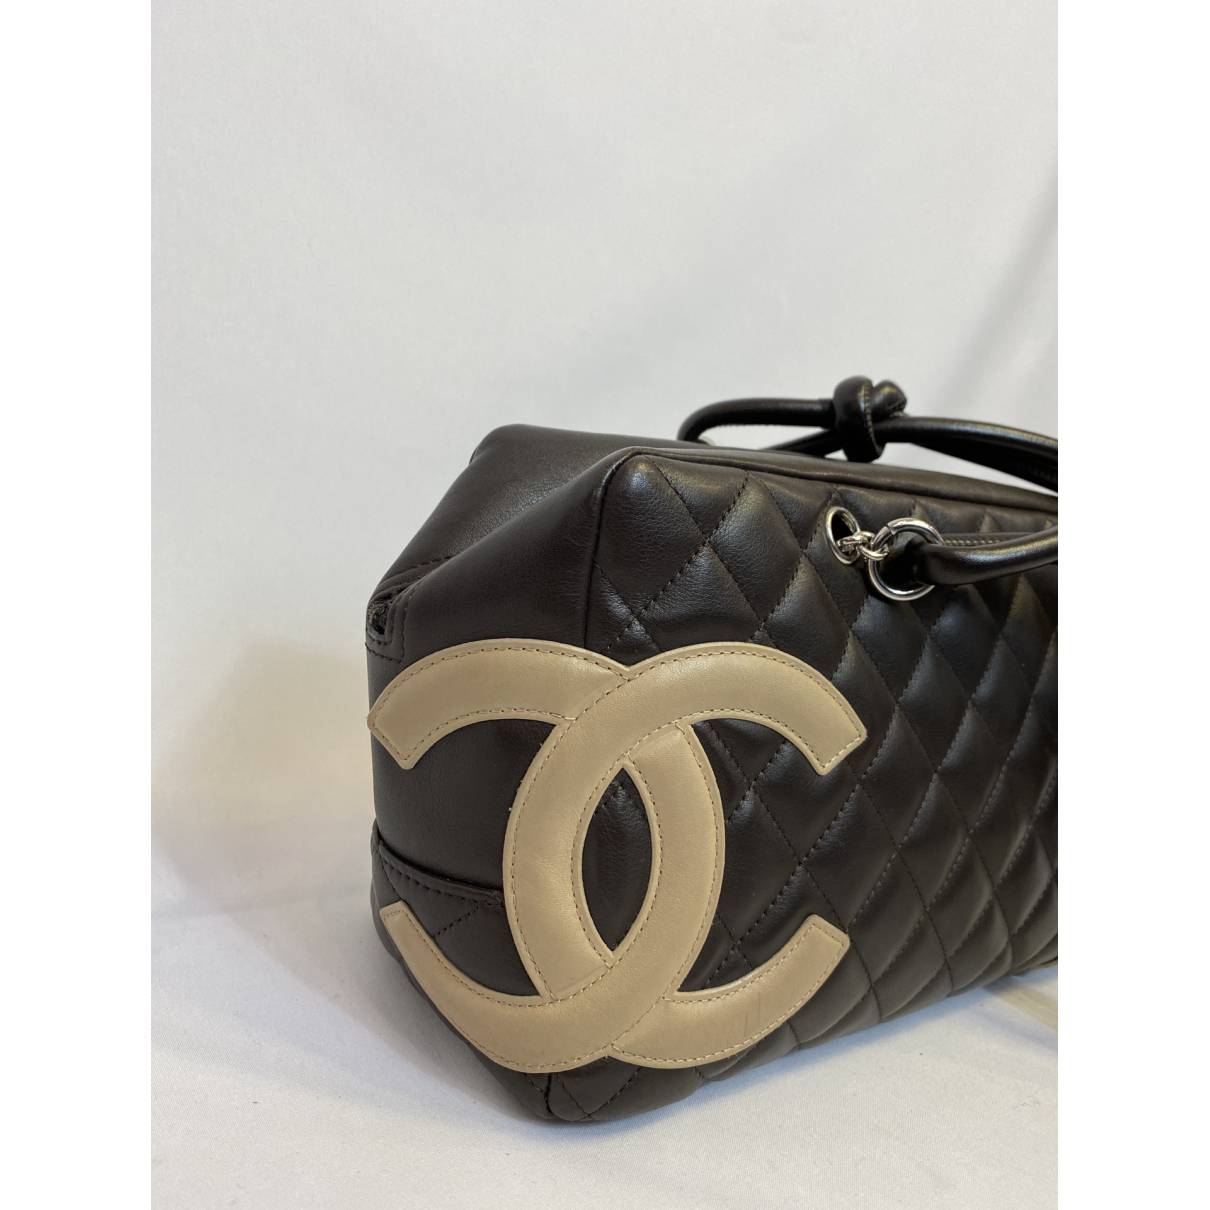 Chanel - Authenticated Cambon Large Rectangle Handbag - Leather Brown Plain for Women, Very Good Condition